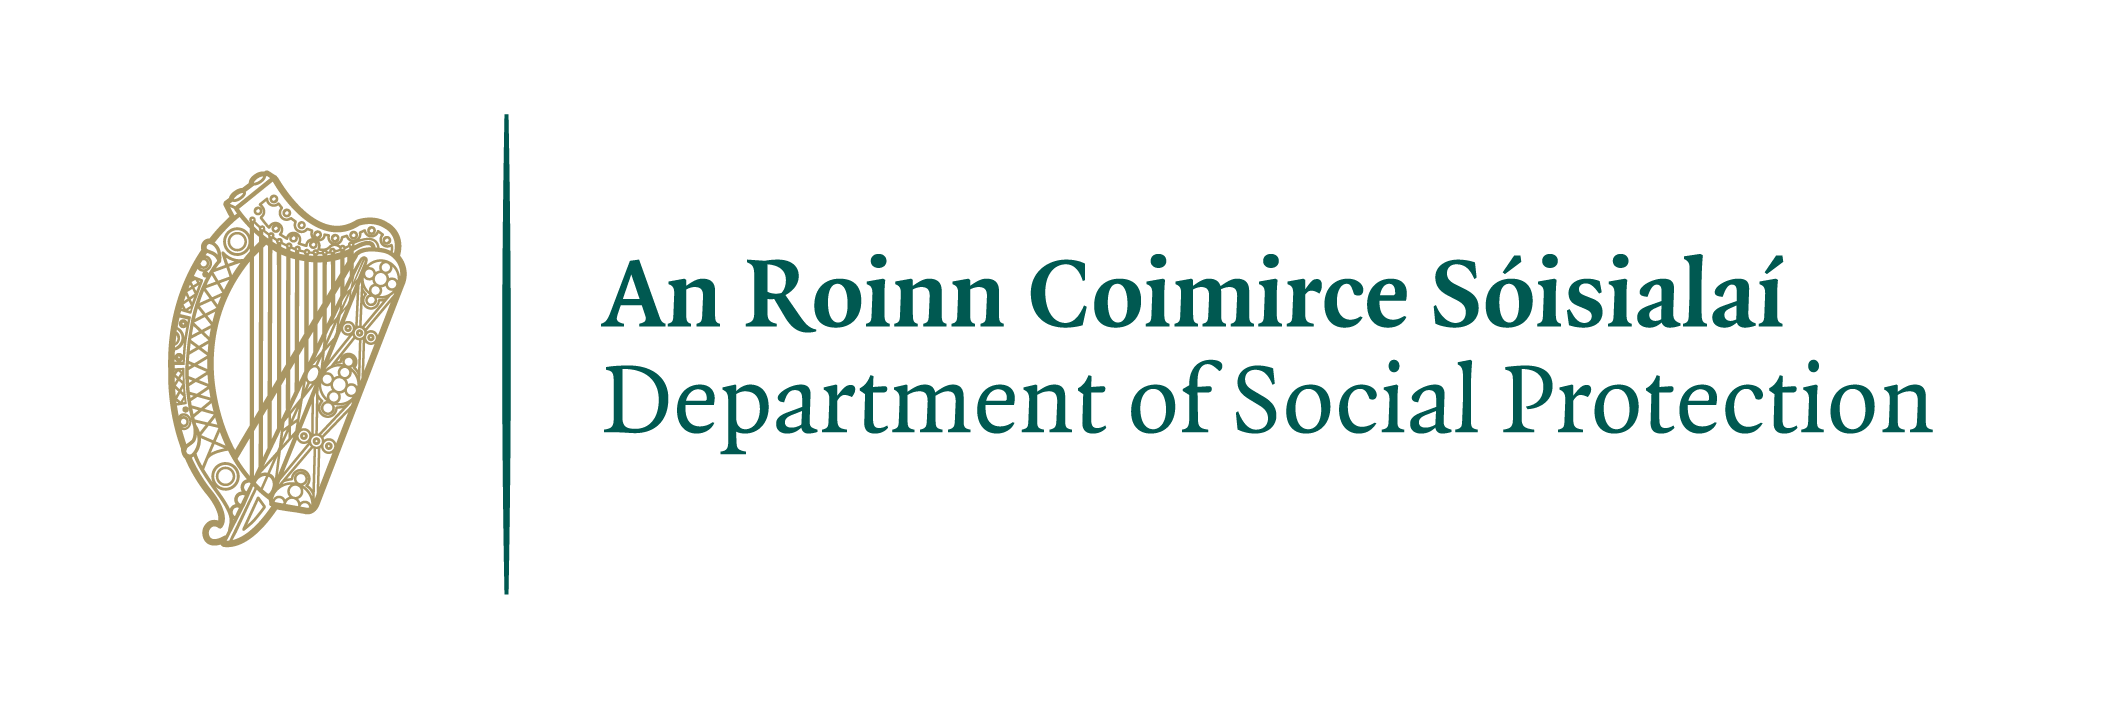 Employment Services Offices – Department of Social Protection